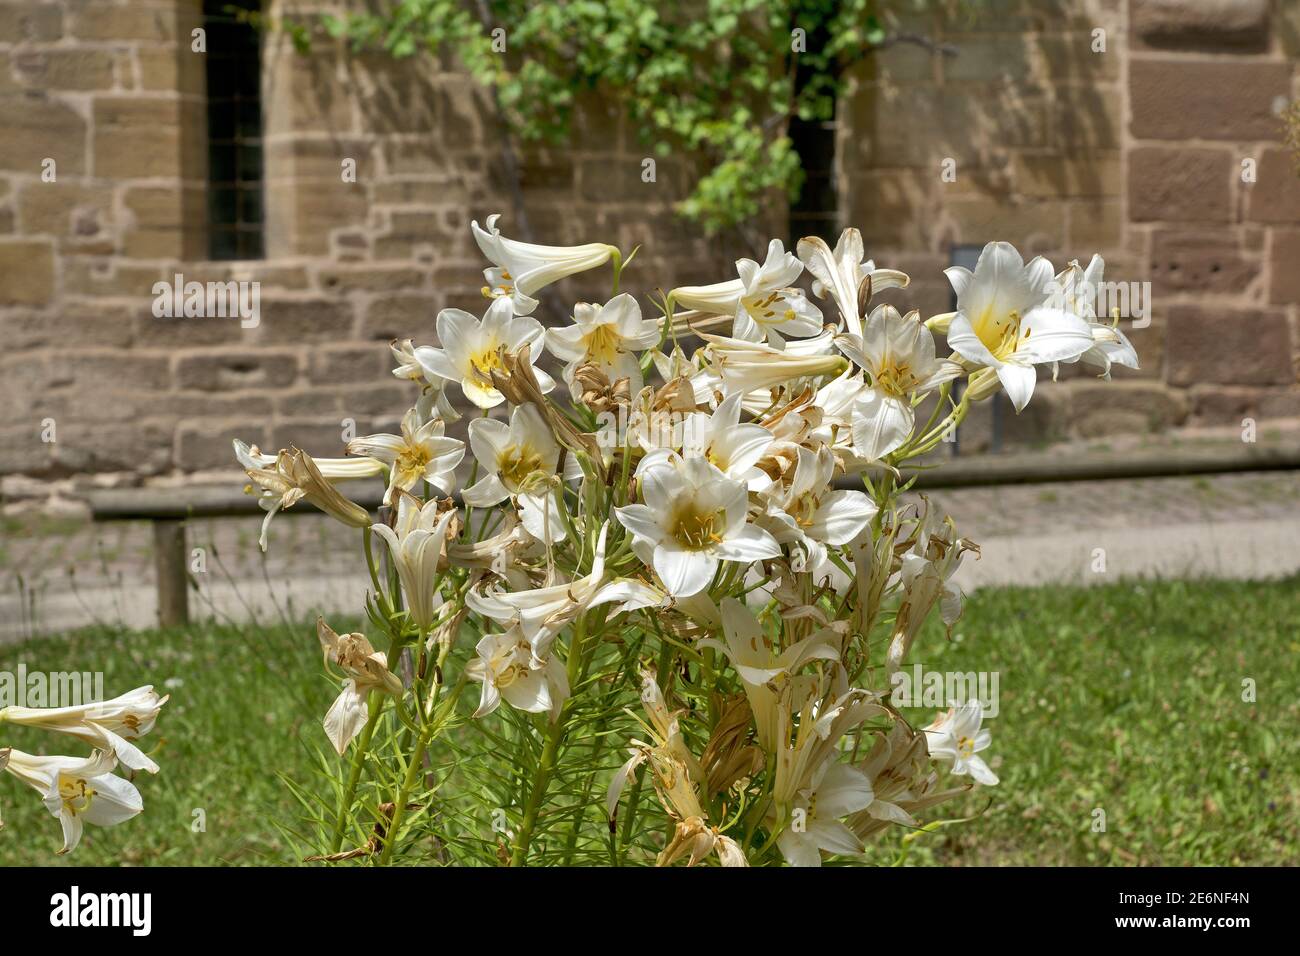 Young and old white lilies Stock Photo